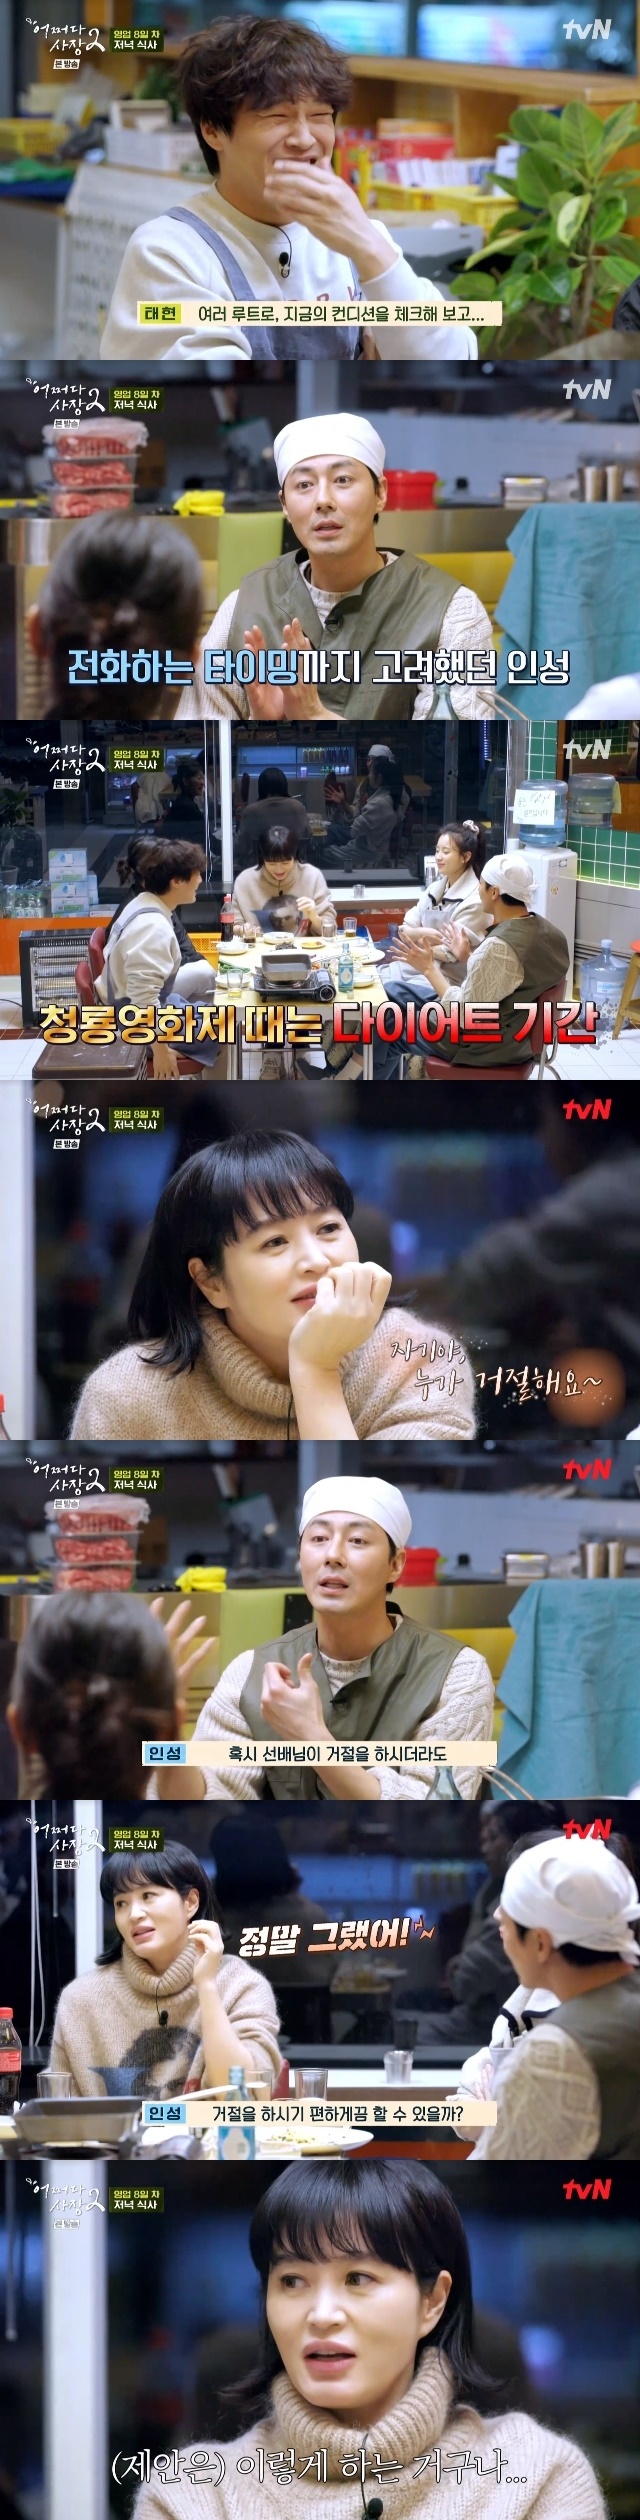 Kim Hye-soos entertainment show, which was filled with the consideration and effort of Jo In-sung, was revealed.In the 12th episode of TVN entertainment How the President 2 broadcasted on May 12, Actor Kim Hye-soo, Han Hyo-joo and Park Kyung-hye joined Alba as the 8th day of Mart sales.Ahead of Vic-Fezensac on the evening, Han Hyo-joo developed a special dessert menu that added pears, brown cheese and pomegranate.Han Hyo-joo asked, Please evaluate (the taste) honestly and relentlessly with concern before the menu was officially released, and Jo In-sung said, I am a bit of a scolder.Ill break it right away, there are a lot of brooms here. But Jo In-sung, who tasted the menu, gave him a passing score, saying, Get out of the Piper (the Piper prize) right away.Kim Hye-soo said, It is delicious next to him and even laughed with his bare hands.In the meantime, the dinner menu was a problem: lunch Vic-Fezensac seemed to lack something to sell only udon and ramen.Jo In-sung hastily started preparing for the blue pumpkin pasta.Jo In-sung was worried that it was the first time that a large-capacity Pasta was thawing the moon, but he was ready to start with Han Hyo-joo and a fantastic breath.Since then, they have begun receiving formal orders and all of the Pipers have sent praise to the desserts of Jo In-sung Pasta and Han Hyo-joo.In the meantime, the Piper appeared in the family of Butcher shop boss who was helped every time in Mart.The boss and his wife, who had been talking to the bosses and Albaz while eating food, unexpectedly told the fact that they were not communist natives.After being fired from a job where he lived in the princess for seven years, he came here without having anything.So the butcher shop boss and his wife had to start everything from the beginning as if heading to the ground.In an economically difficult moment that there is no rice to eat right away, I was able to make the current butcher shop with the help of my mother-in-law who gave me all the shells with Mr. Mart who gave me his hand.The president and his wife expressed their gratitude for the communist residents who helped them to poverty, saying, There is something like a fist in their chest.Kim Hye-soo comforted the boss and his wife, especially Kim Hye-soo, who hugged her, saying, Thank you so much, youre really so great.When her wife burst into tears on the small but hard handed comfort, Kim Hye-soo said, He was a hard man, he put up with it, its okay to cry.Im not just crying because Im tired and upset. My wife said,Thank you, I thought you knew. I think like a film. Kim Hye-soos ability to comfort Han Hyo-joo was well known.Han Hyo-joo closed the Mart door and prepared dinner, and Kim Hye-soo hugged him in his arms. When I first met Sunbather, Sunbather hugged me like this.I cried. I didnt mean to cry, but I think theres a button on this hug of Sunbather. Its so warm.Kim Hye-soo touched the ball like Han Hyo-joo was beautiful.After dinner, the story was solved. Especially, it was the story that Kim Hye-soo was invited to How the President 2.When Cha Tae-hyeun said, I checked my condition with various routes, Jo In-sung said, Is not it an excuse to say, Is it right to call now?Its a Diet period at the Blue Dragon Film Festival. My sister said, Not now, not that period.Kim Hye-soo said, Honey, who refuses? But Jo In-sung said, When anyone proposes, it is more likely that they will be rejected.I was worried about what timing Sunbather would be able to make it easier to refuse no matter how he refused. Kim Hye-soo then said, (Jo In-sungs) text was just like that; I also learned (the proposal) is this way.There is a lot of consideration, he said, and he also grew up through Jo In-sung.Kim Hye-soos mid-tale followed: Jo In-sung said, I had a lot of gods to do my first shoot with Sunbather.I cant express it out of my face, but inside, its too trembling and bursting. Crazy. Im stuck with a hard god.Thats when Sunbather said, Honey is good (he said) and I was strong from a junior position, he recalled.On the other hand, Han Hyo-joo, who has to leave first because of the schedule, said, If you eat dinner with Sunbather, you will only praise your junior.Sunbather I wanted to talk about good things like this. Kim Hye-soo said, I feel like a better person than me, a good adult.But I am not an adult, and in fact it is not so good. However, Cha Tae-hyun and Han Hyo-joo said that Kim Hye-soos as it is getting better as it is, and Kim Hye-soo laughed, Thank you so much.The next day Kim Hye-soo and Park Kyung-hyes Alba followed: Kim Hye-soo said during dinner that he usually eats breakfast well.However, as the last business day of the bosses, food gifts such as macaroons and croquettes were poured from the morning, and Kim Hye-soo said, I said I did not have breakfast or donatsu ... I do not eat mainly, but it is lazy.